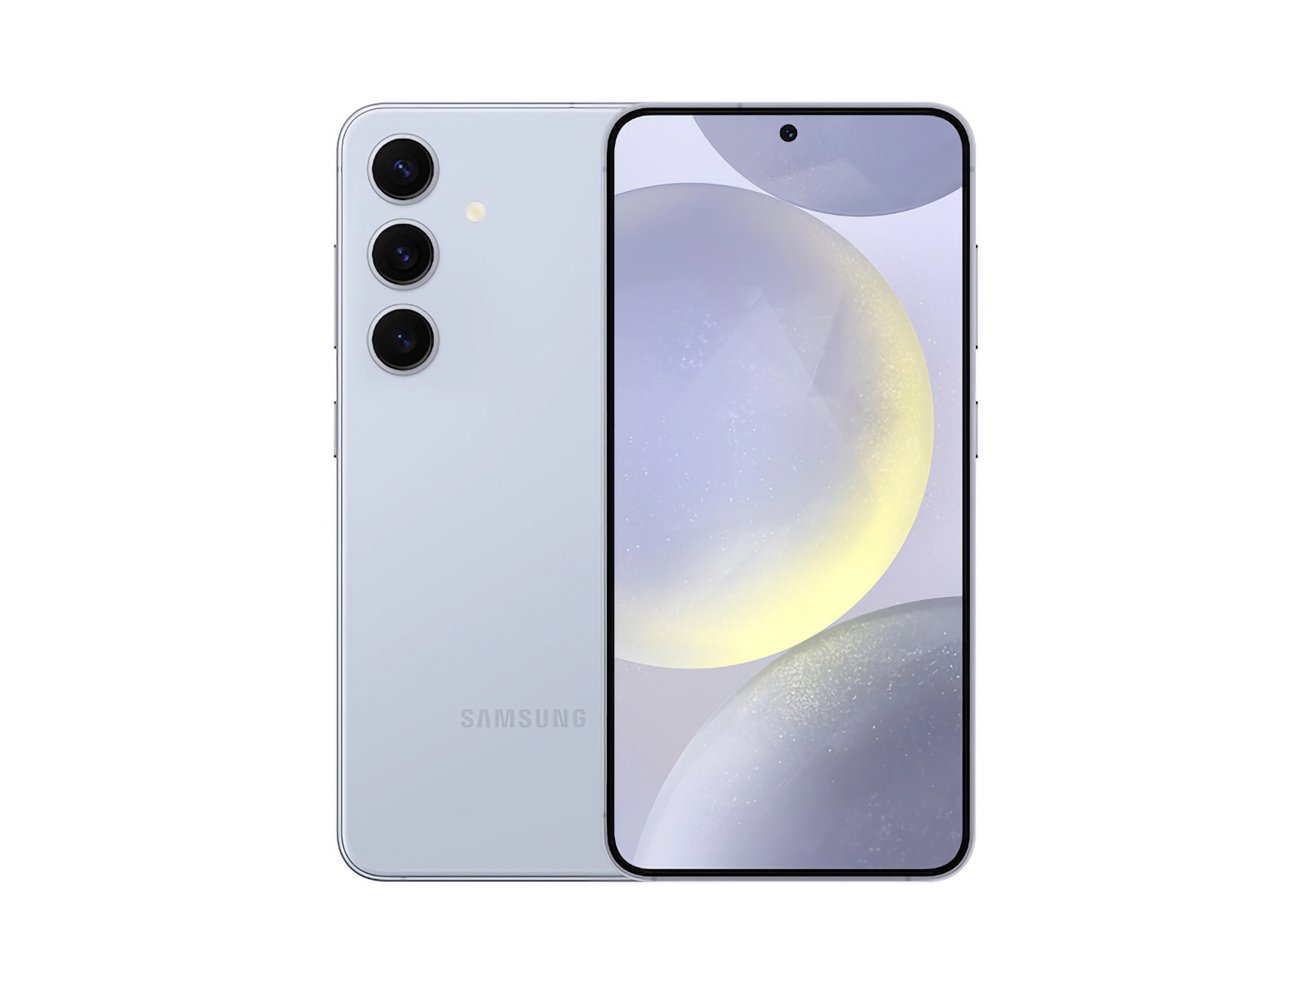 A Samsung smartphone, viewed from the front and back, featuring a triple-camera setup on the back and a punch-hole front camera on a near bezel-less screen.